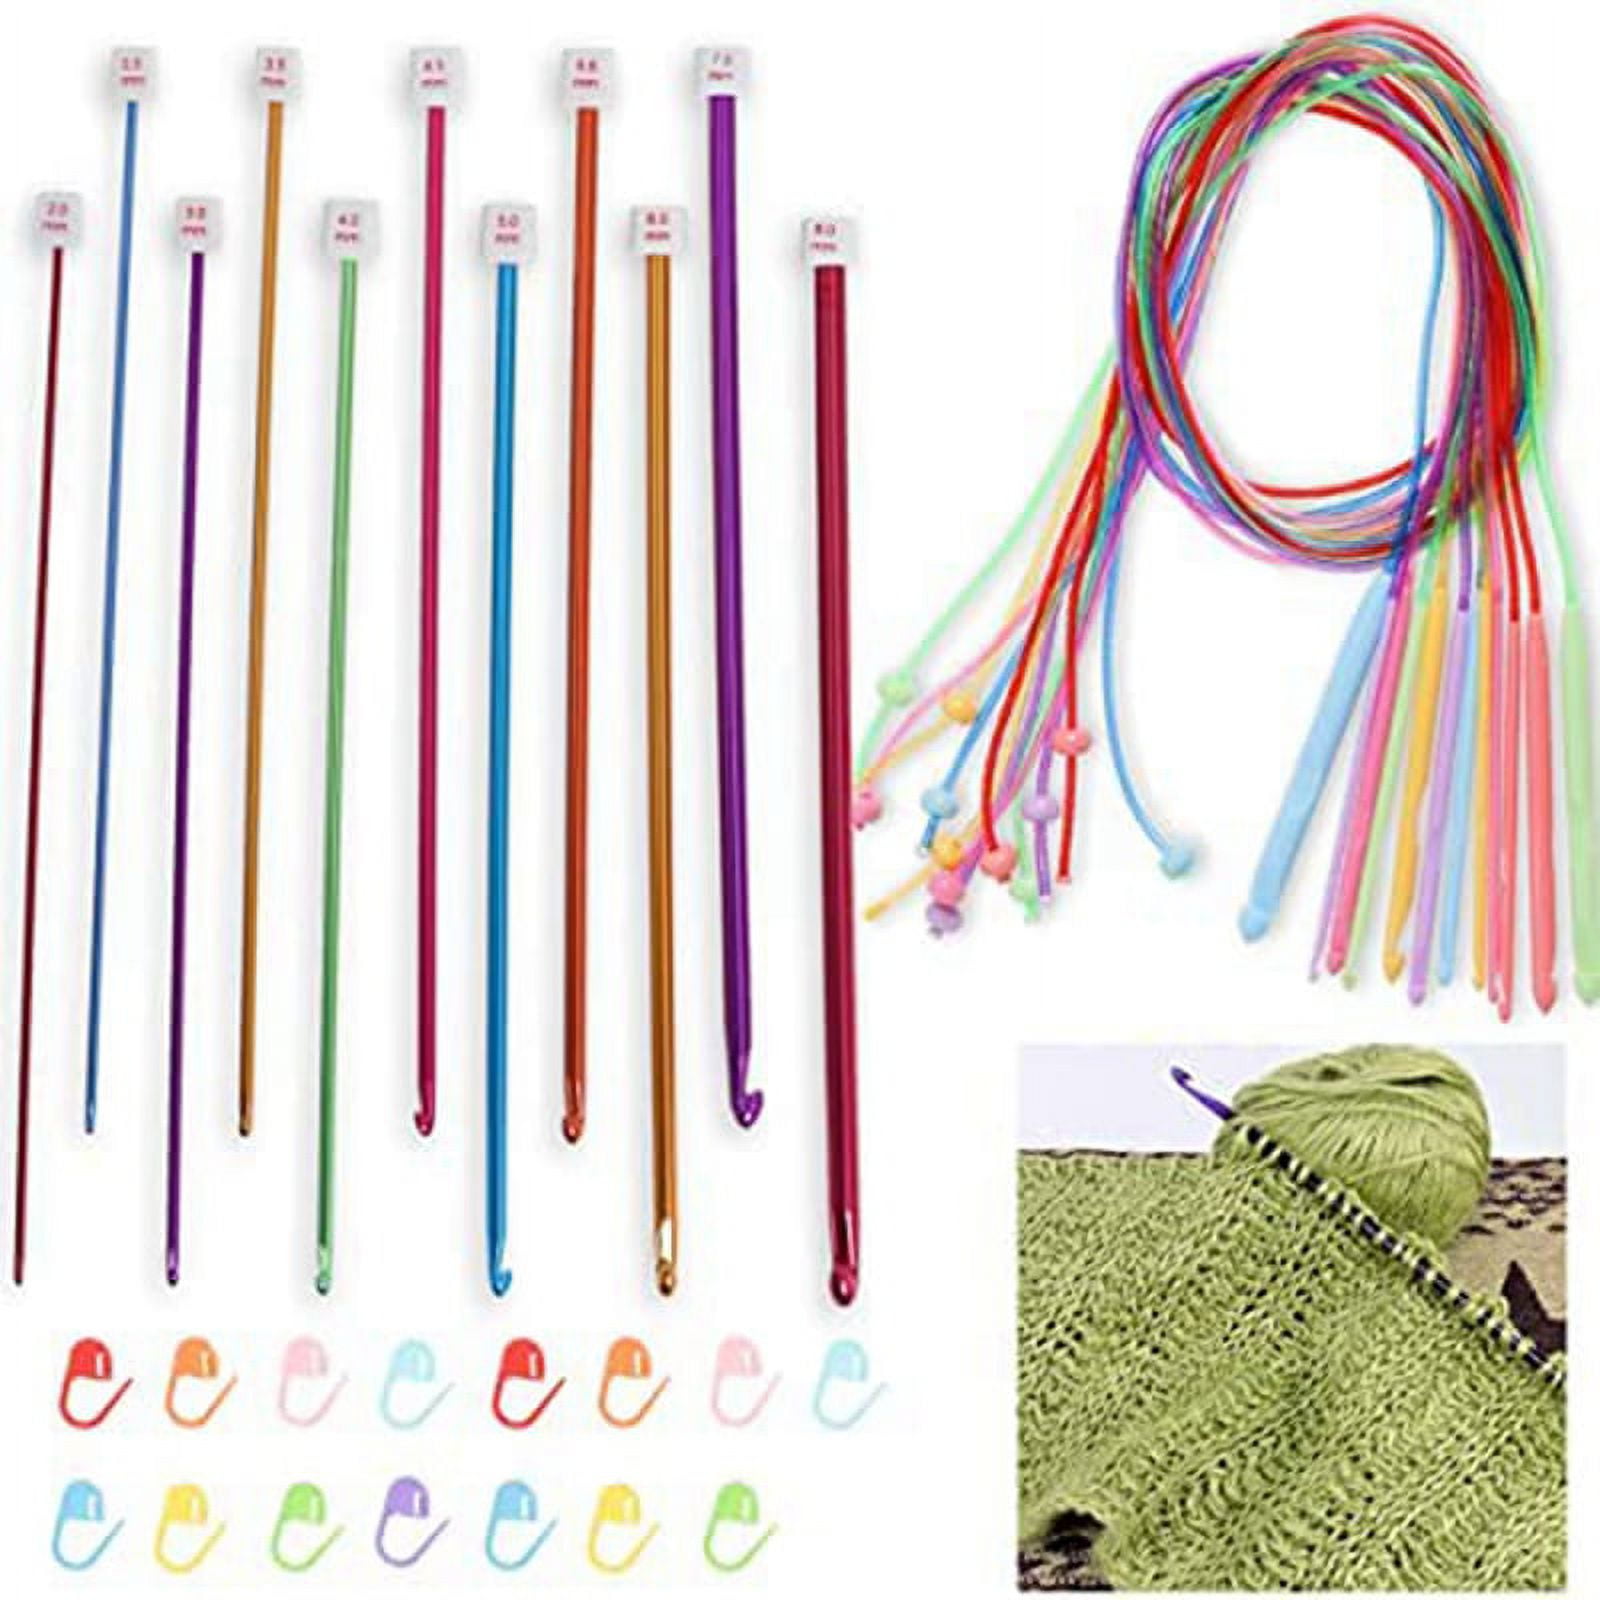 Faginey ABS Plastic Afghan Tunisian Crochet Hook Set with Cable Carpet Rug Weave Knitting Needles 12pcs, Crochet Hooks with Cable,Afghan Crochet Hooks